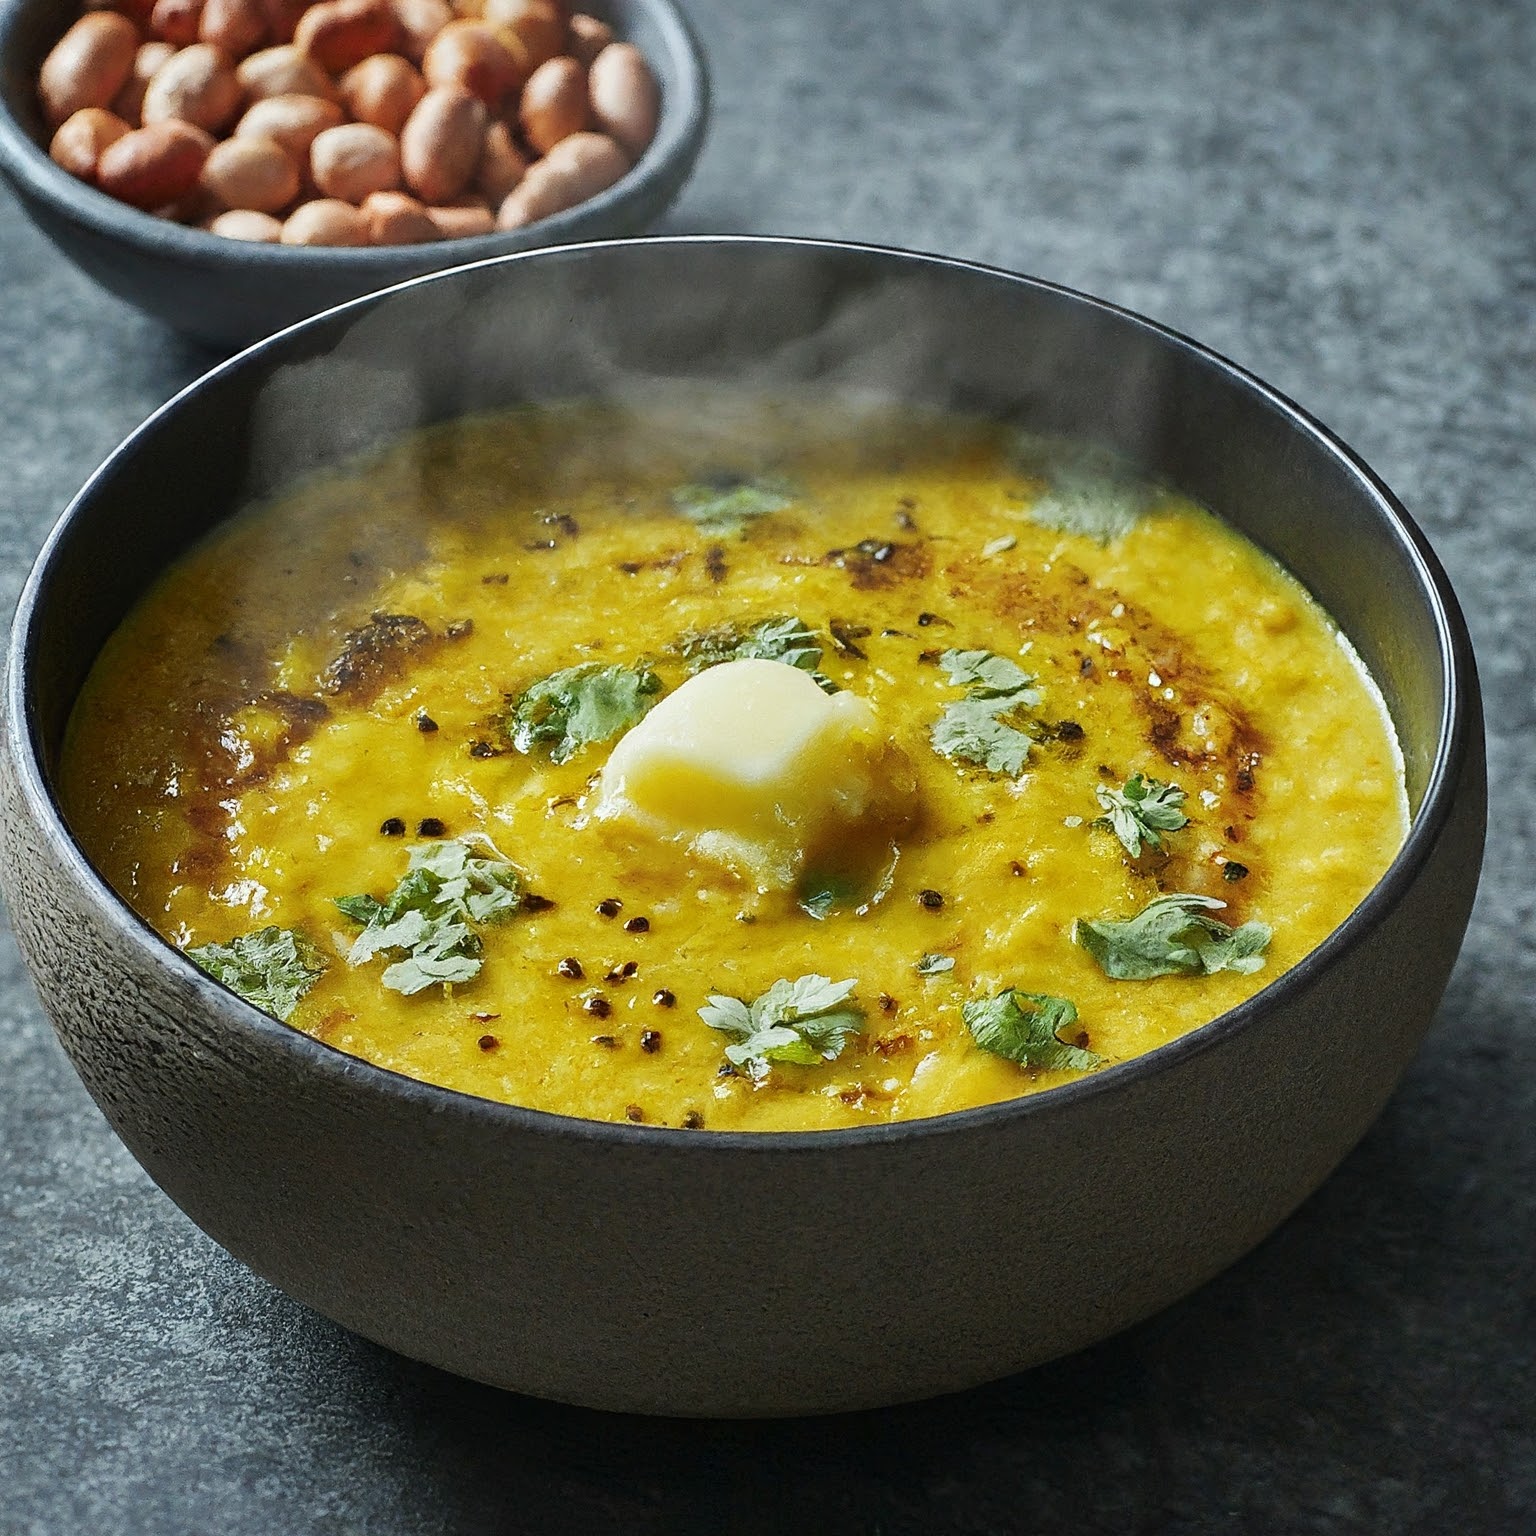 A steaming bowl of Gujarati Dal, a creamy lentil stew garnished with coriander and ghee, with roasted peanuts on the side.